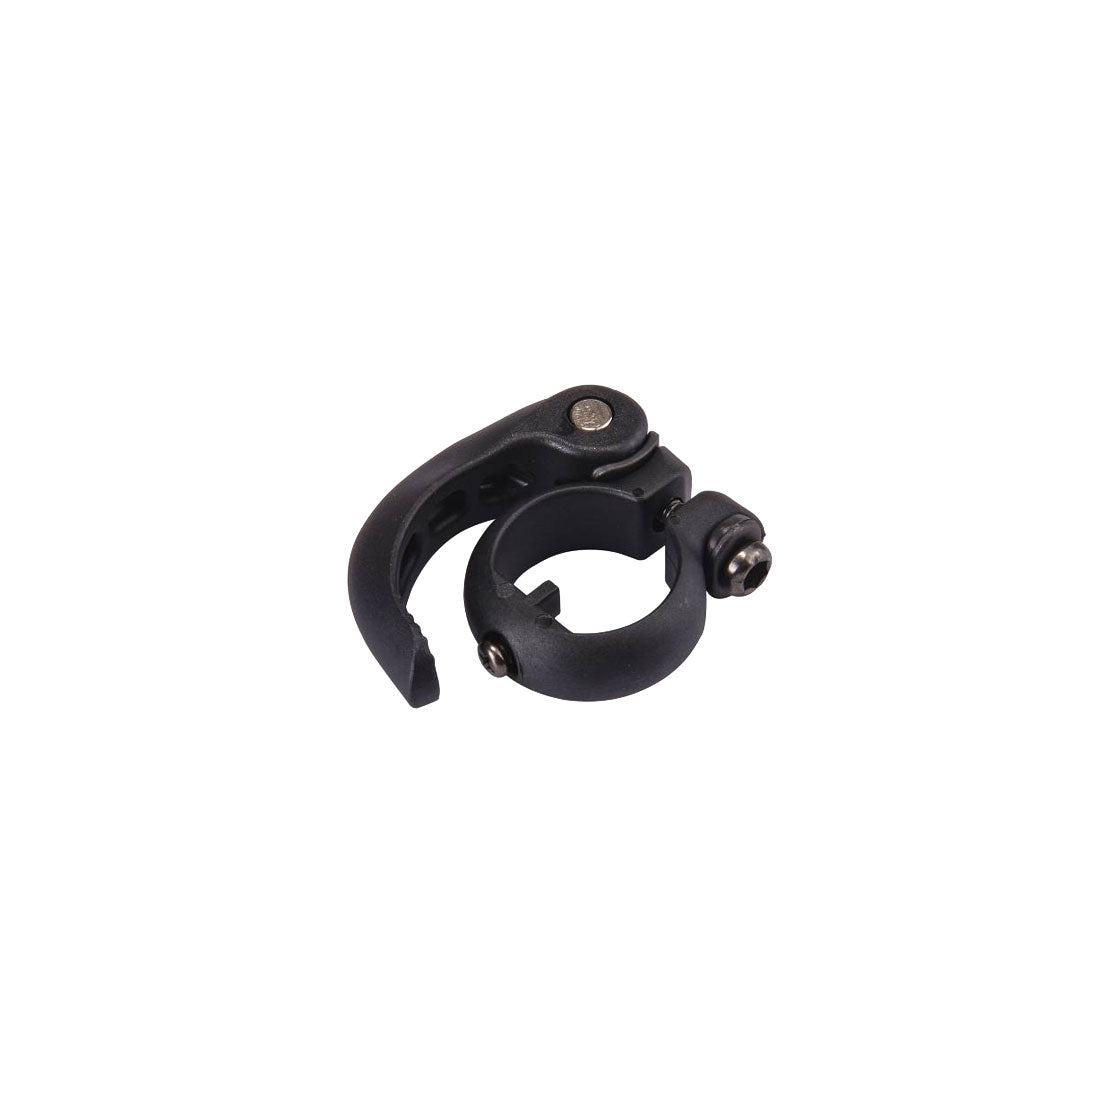 Micro Mini Deluxe Height Adjust Clamp - 1813 Scooter Hardware and Parts